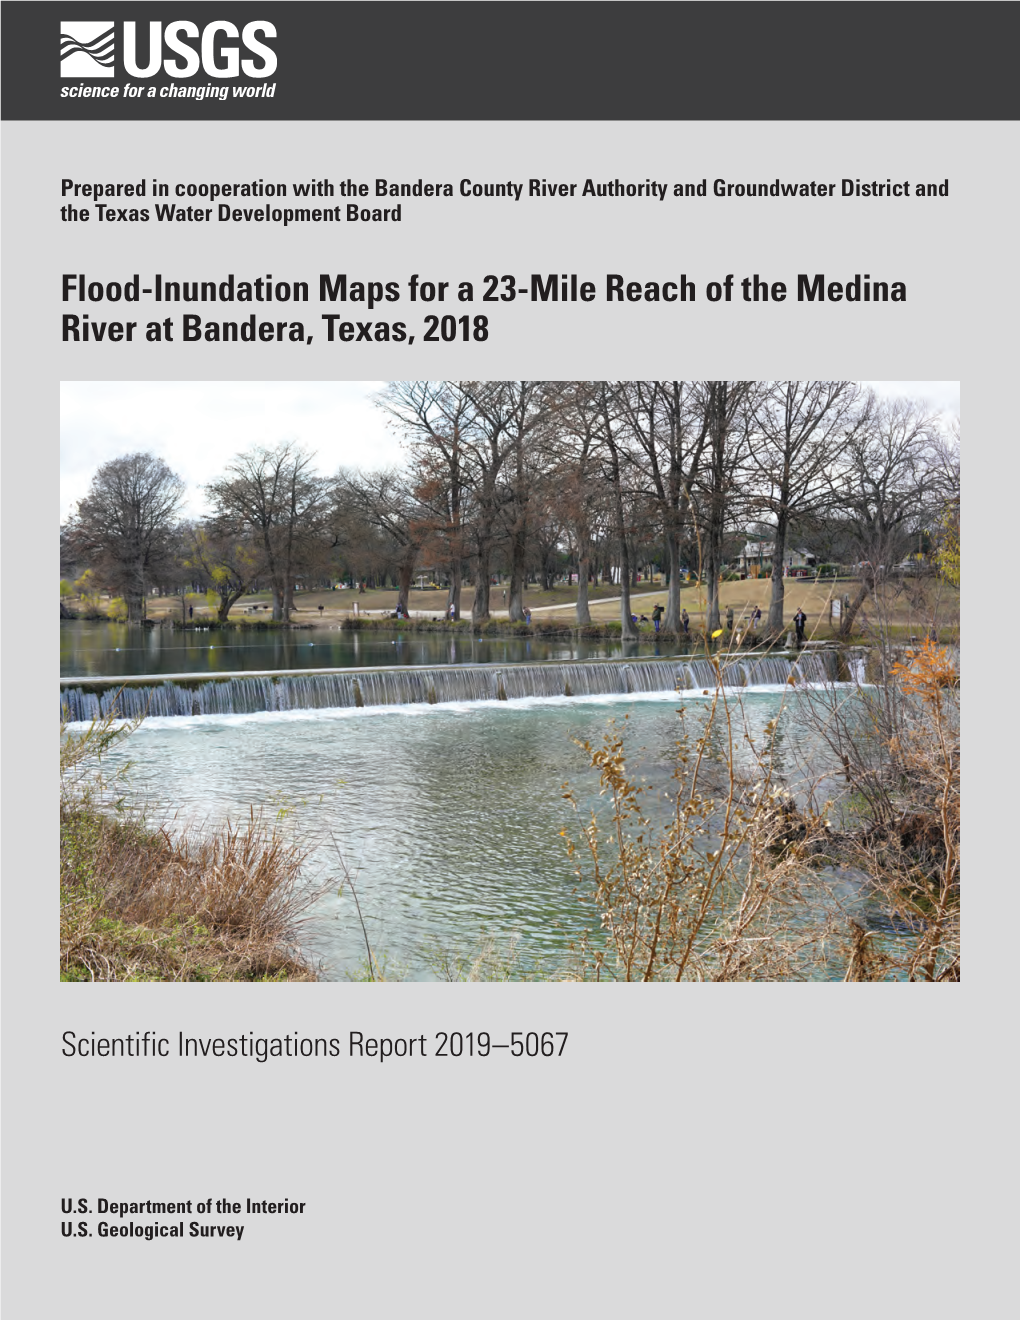 Flood-Inundation Maps for a 23-Mile Reach of the Medina River at Bandera, Texas, 2018